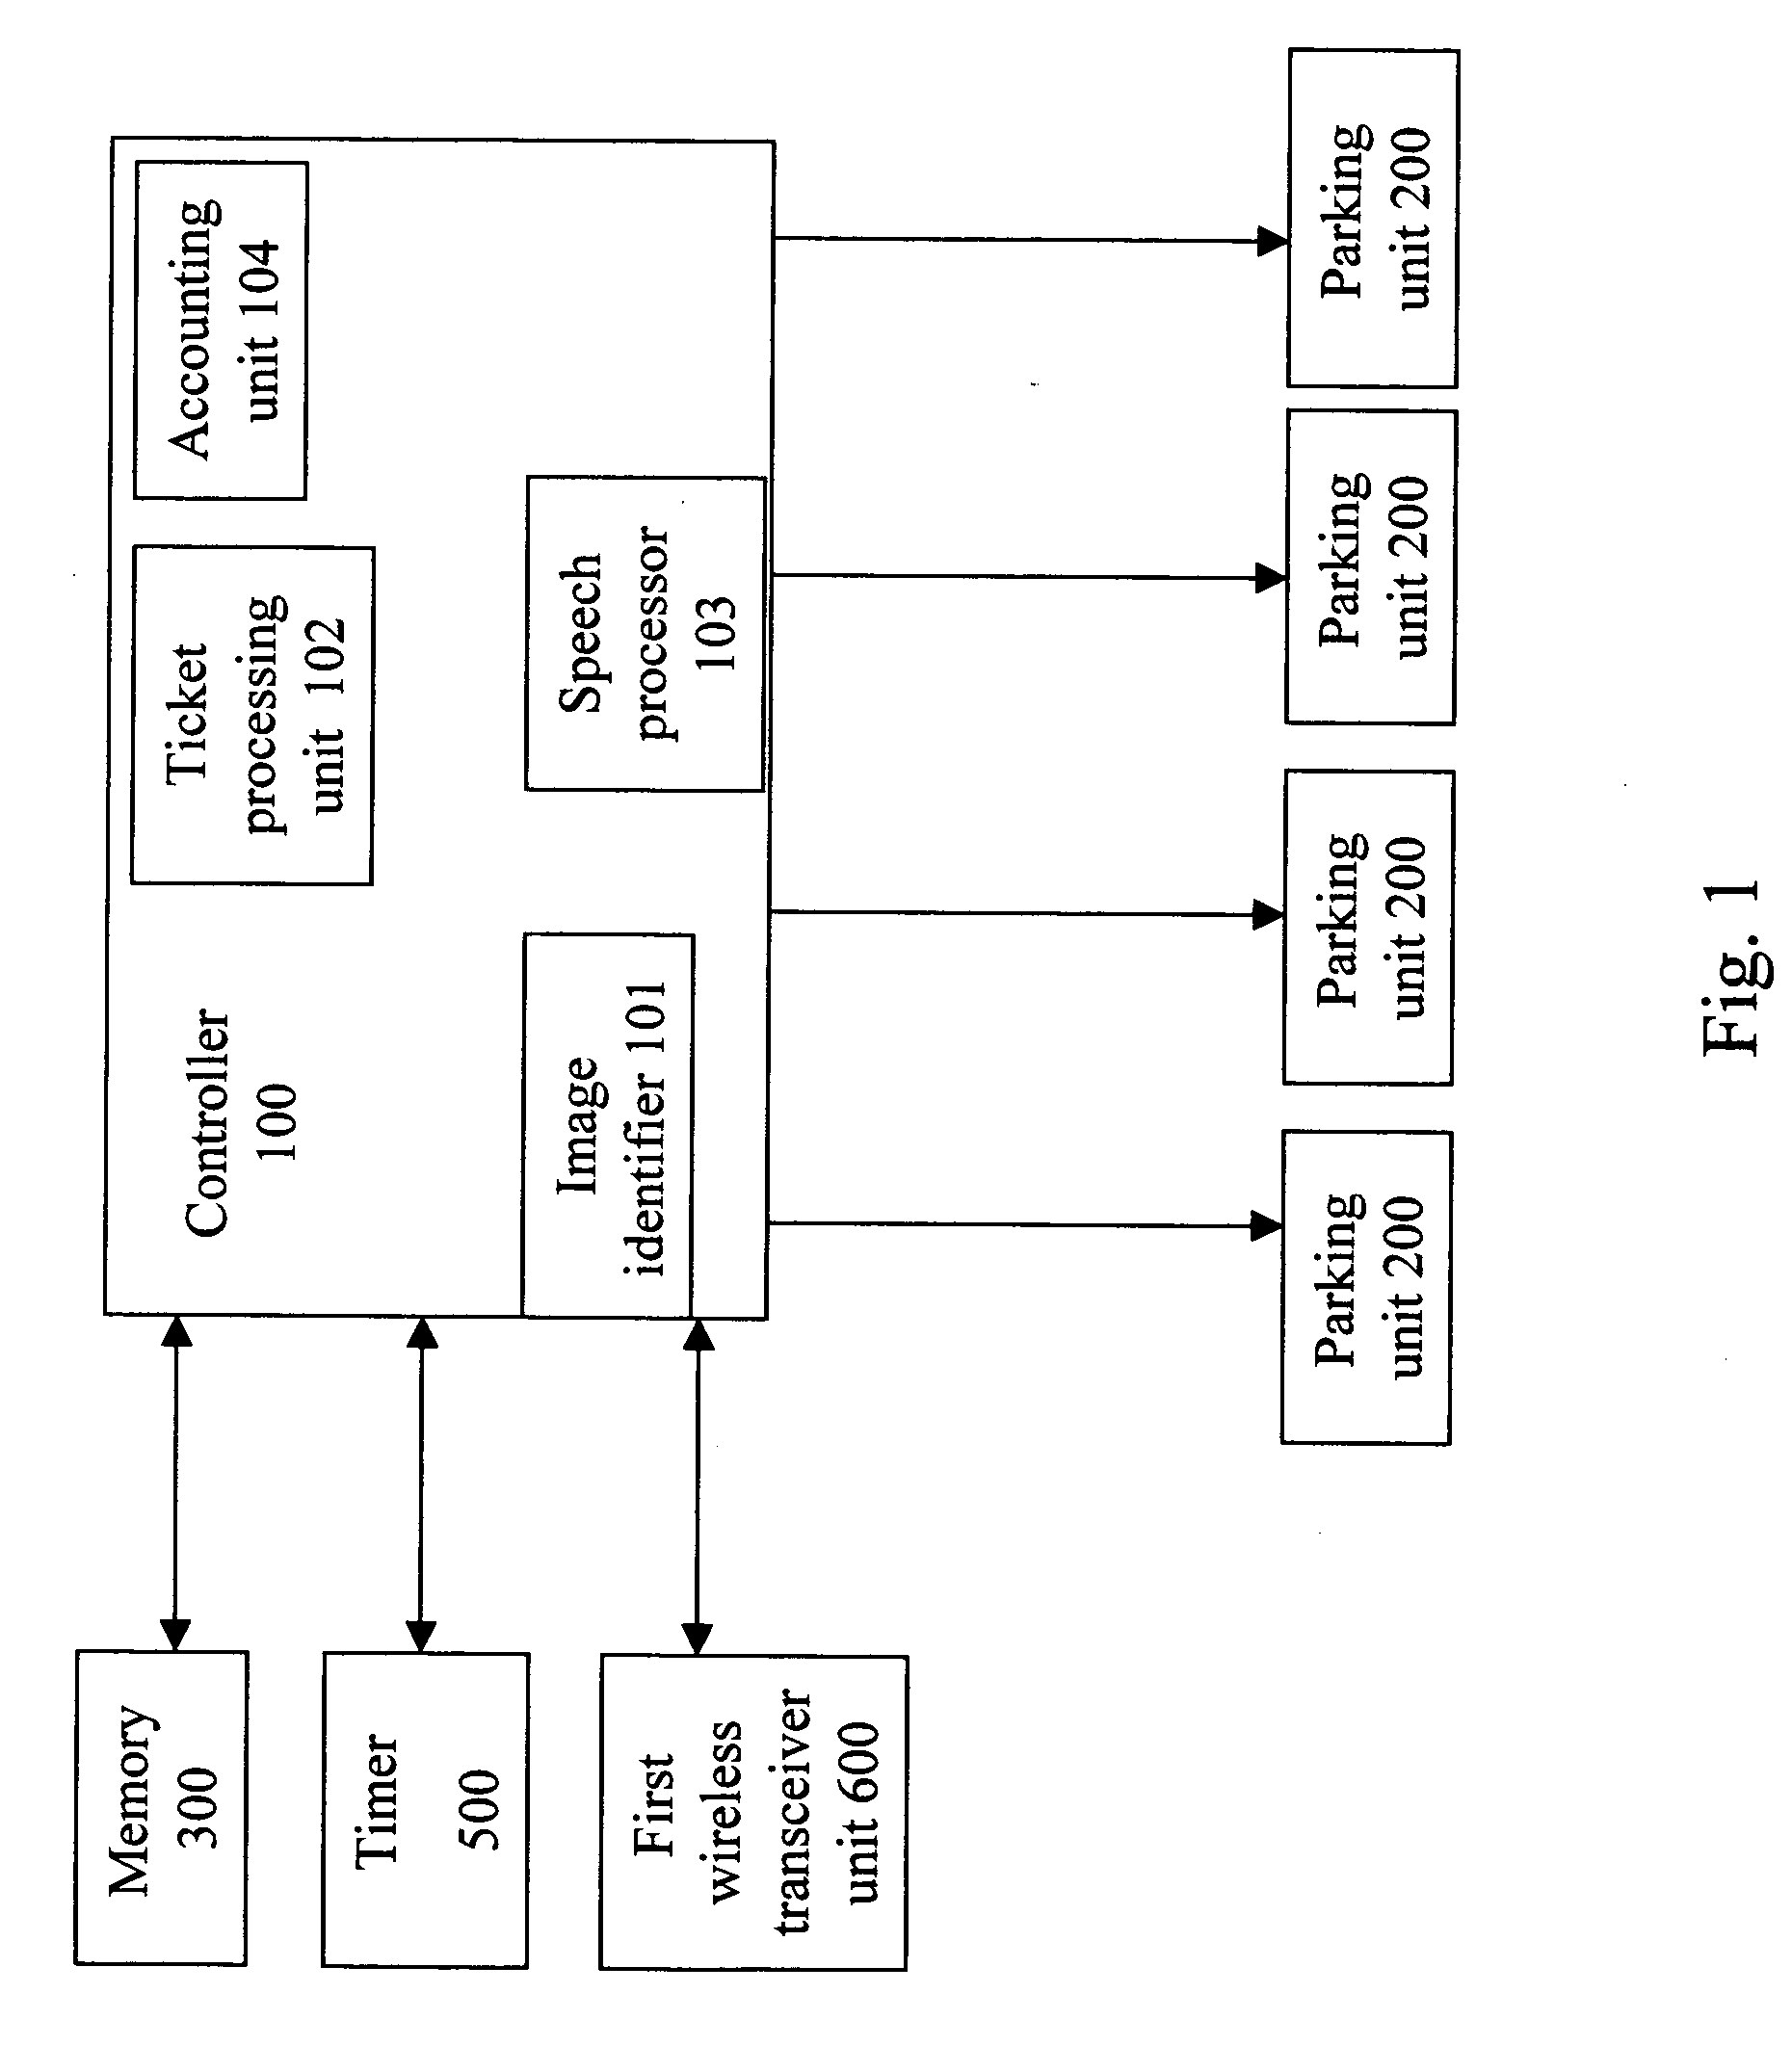 Automatic charging system for parking vehicles